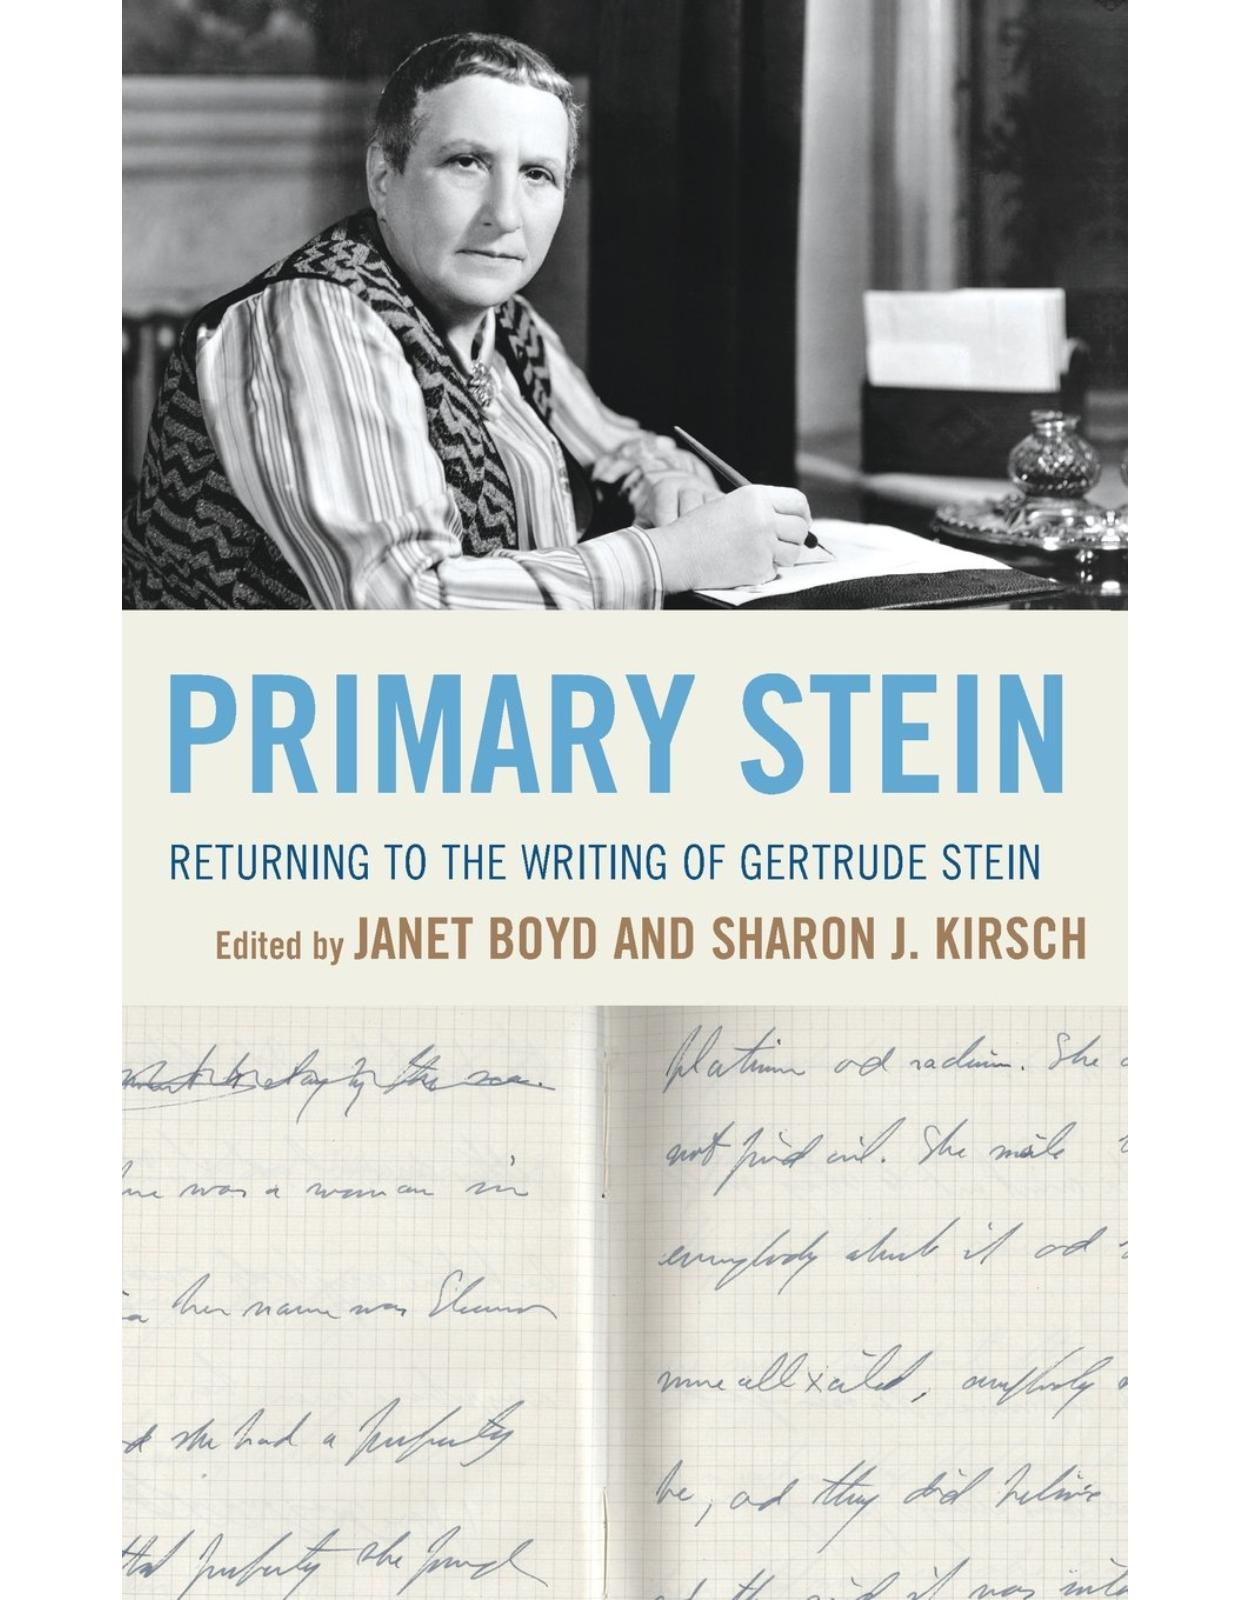 Primary Stein: Returning to the Writing of Gertrude Stein